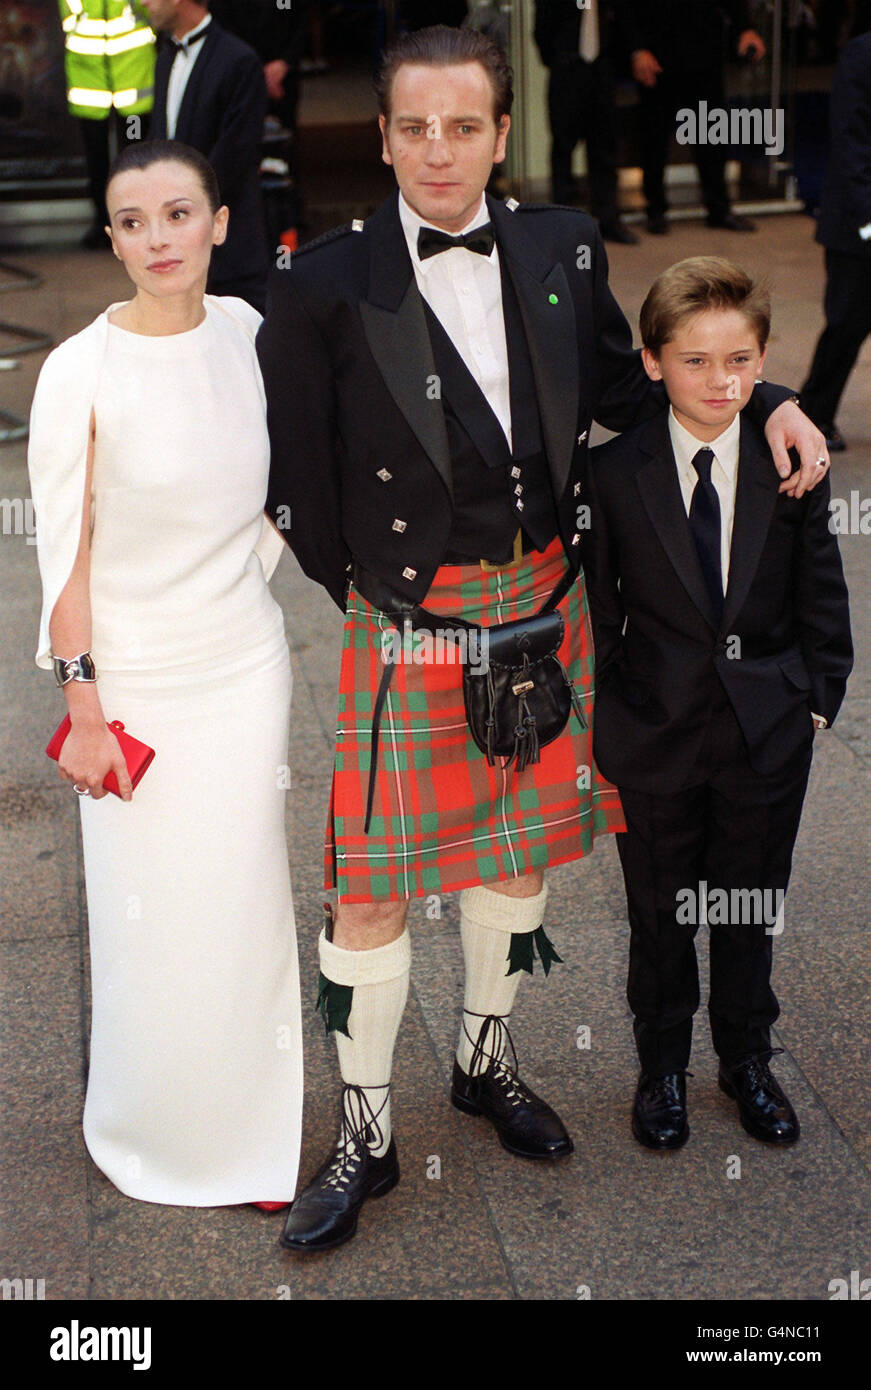 Actor Ewan McGregor (centre), who plays Obi-Wan Kenobi, and his wife Eve, and young actor Jake Lloyd, who plays Anakin Skywalker, at the Royal Premiere of Star Wars: Episode 1, The Phantom Menace at Leicester Square, London. Stock Photo